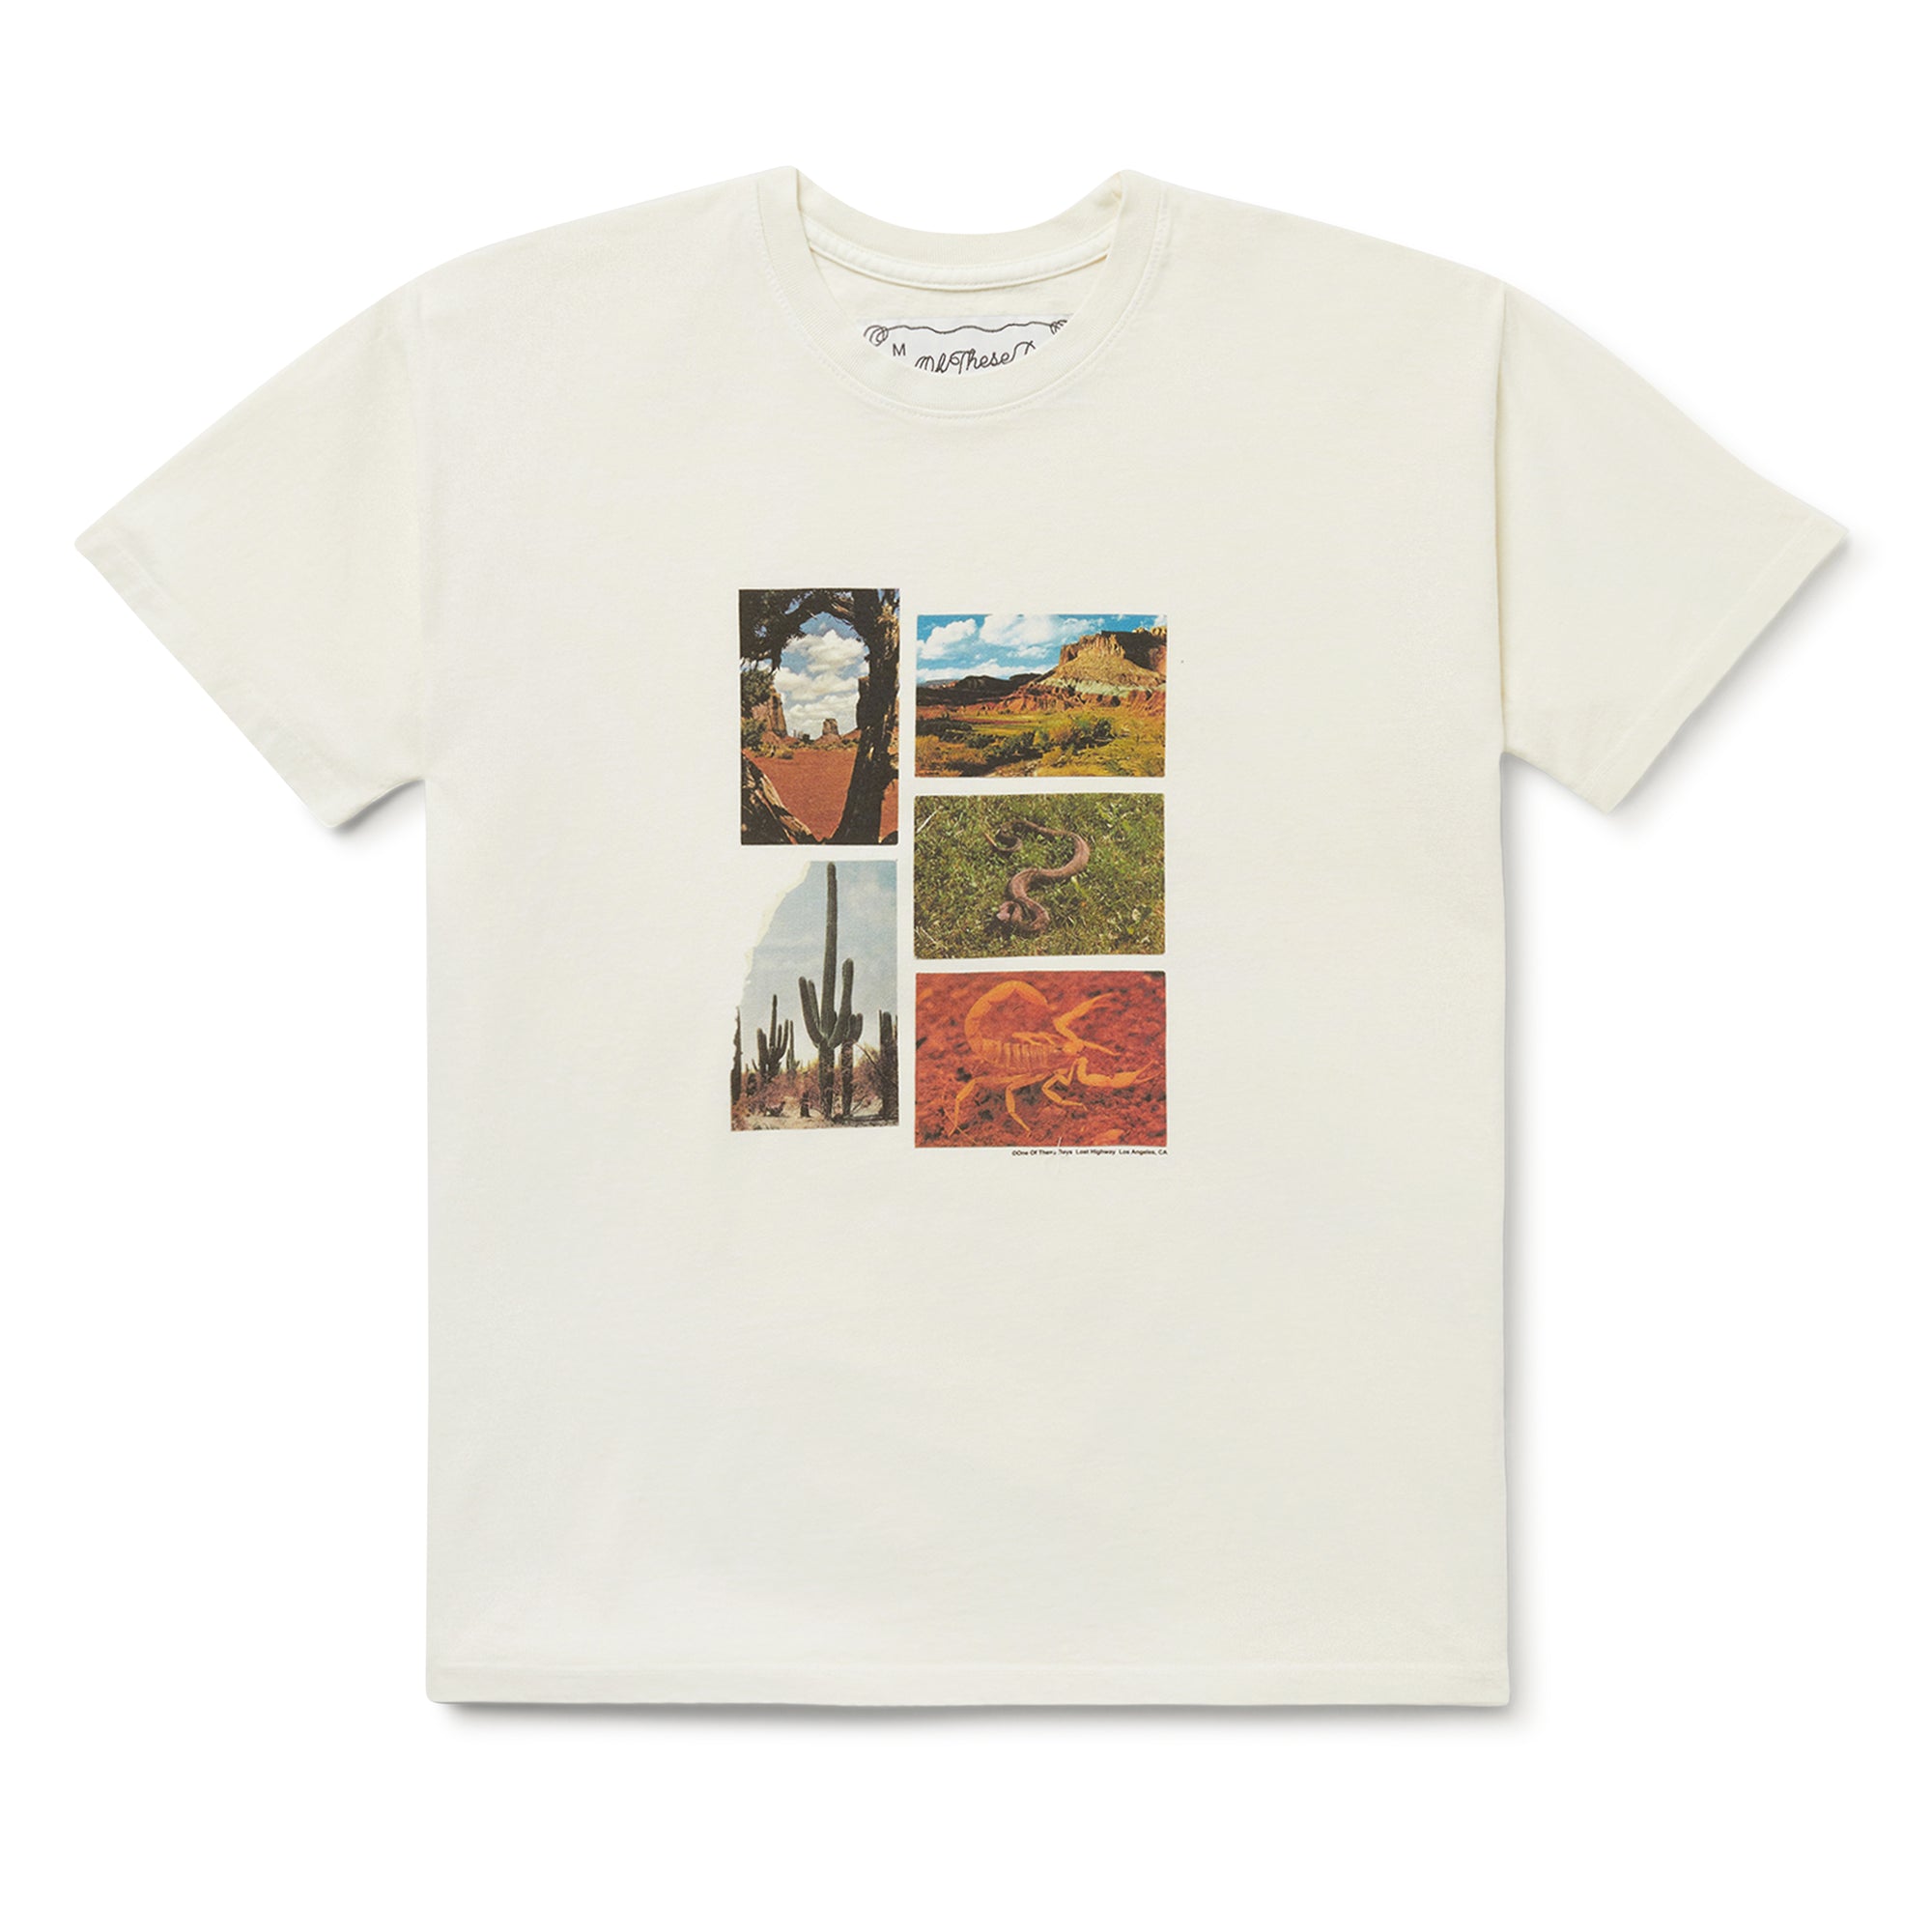 One of These Days - Lost Highway Tee - (Bone) view 1